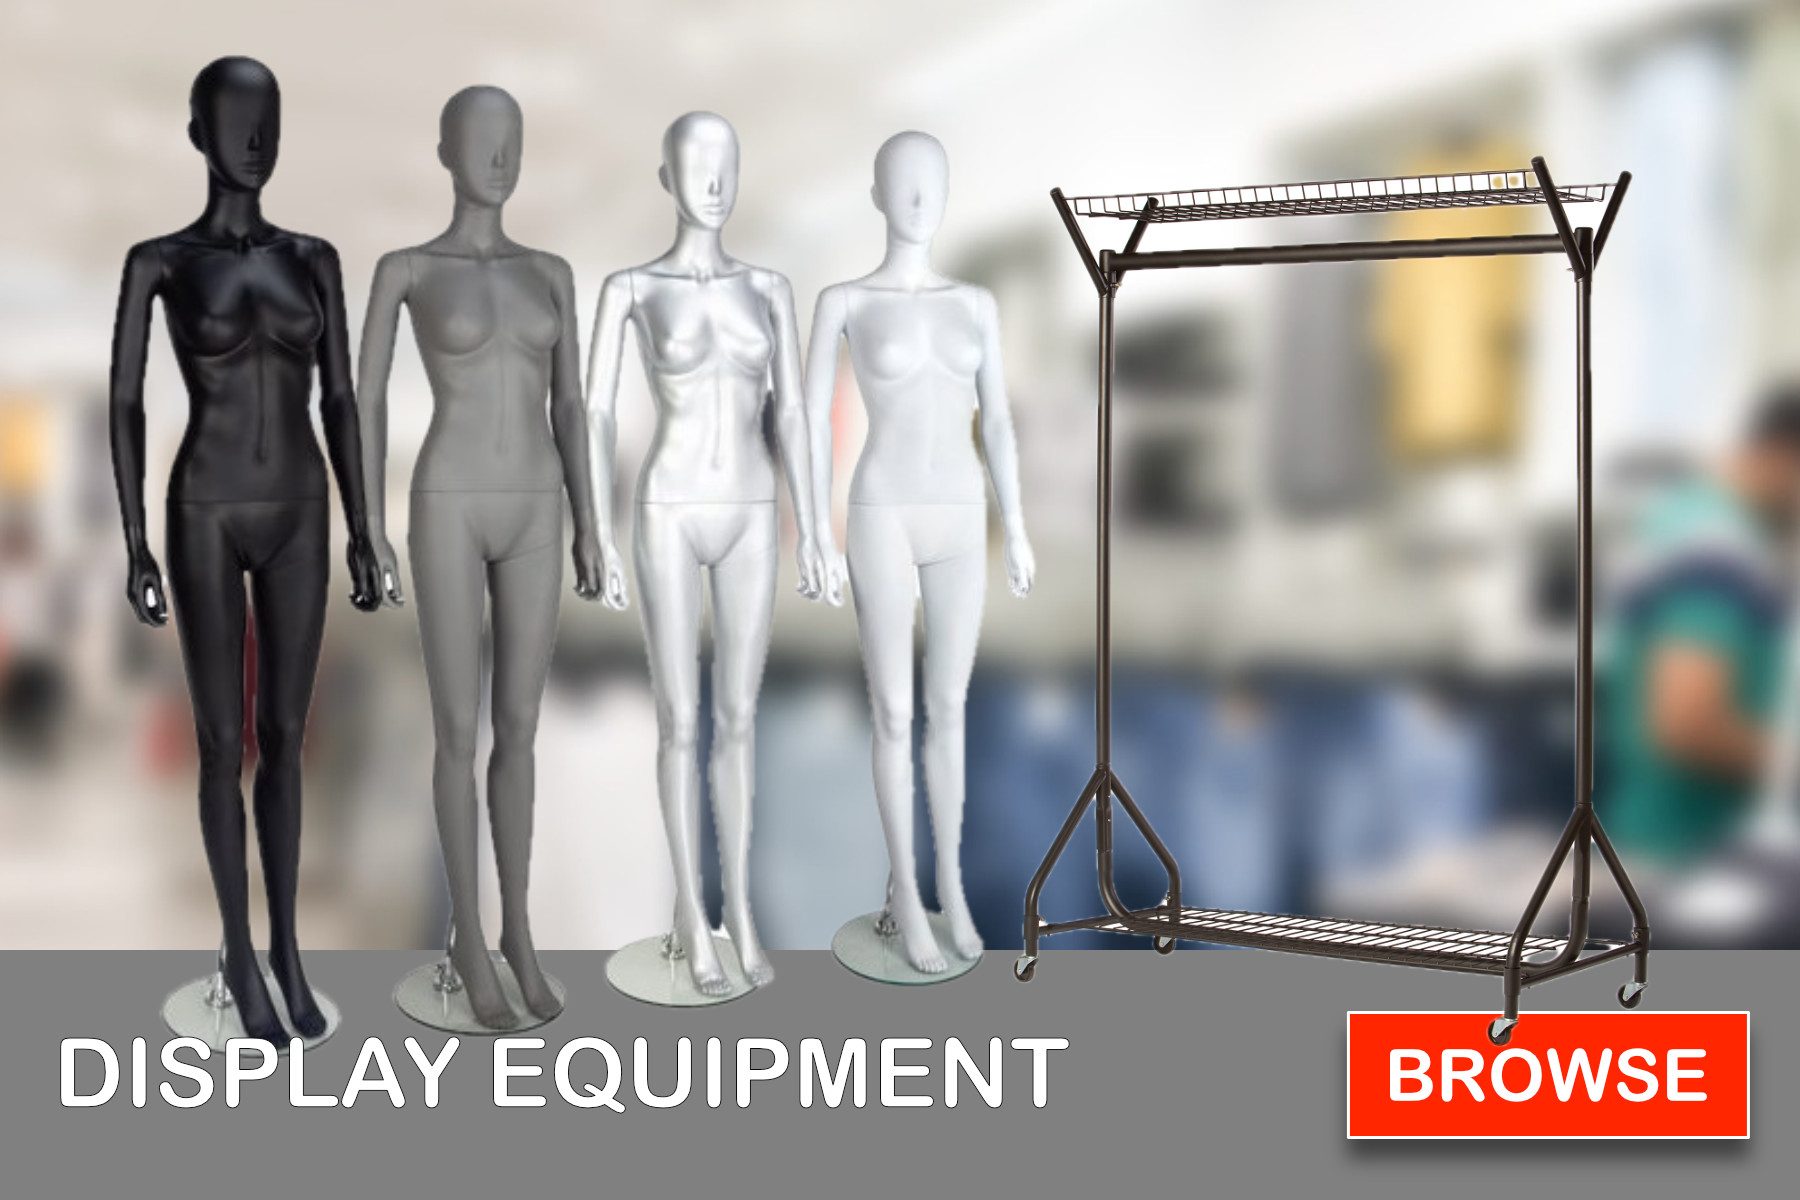 Complete range of display equipment for the retail industry. From mannequins, garment rails, dump bins, outside storage displays, counter top displays and much more